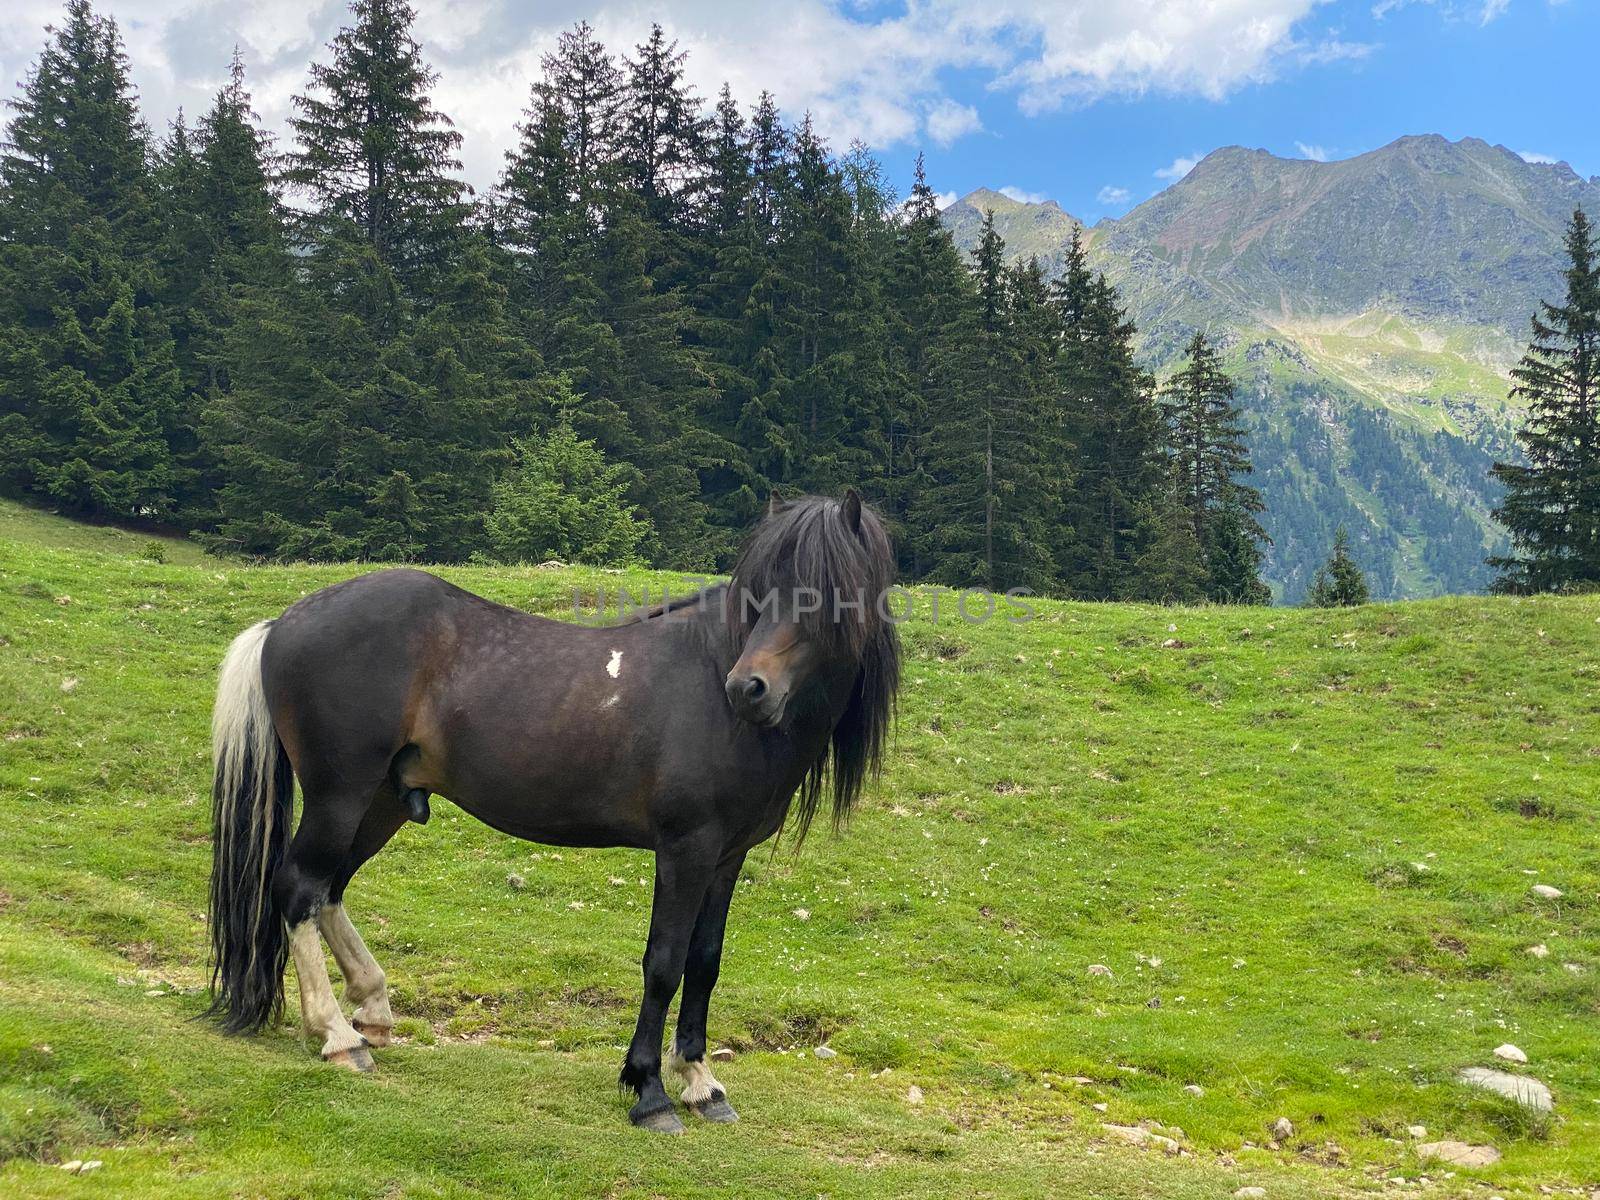 The horse on the pasture, Duisitzkarsee Lake, Austria.The Duisitzkarsee is probably one of the most beautiful mountain lakes in the Schladminger Tauern.The place without  tourists after the coronavirus pandemic.